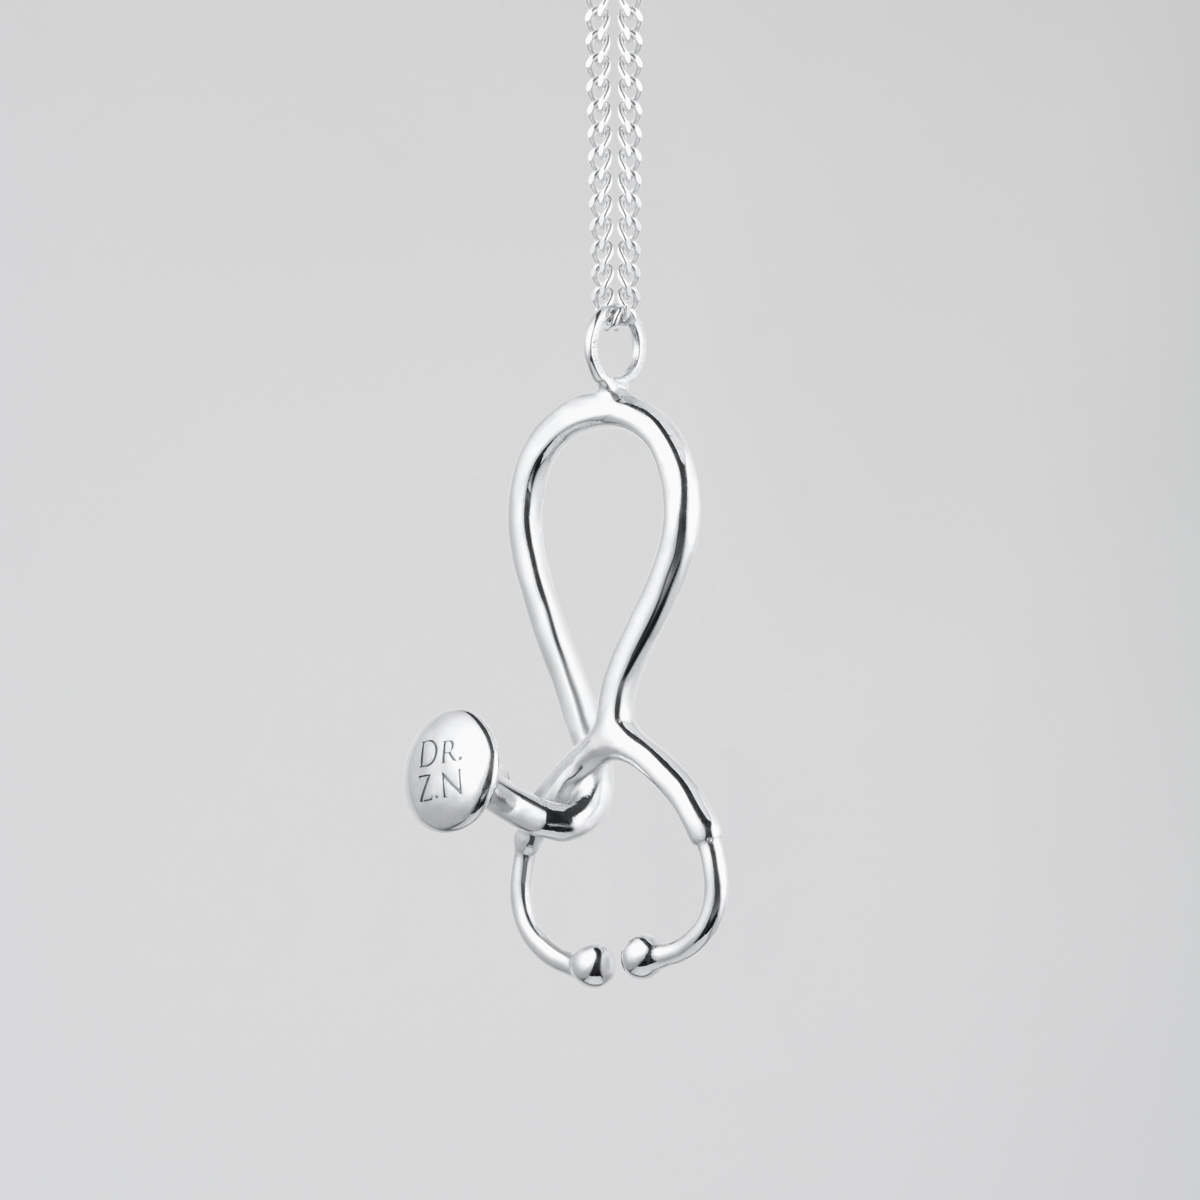 Top more than 164 14k gold stethoscope necklace best - songngunhatanh ...